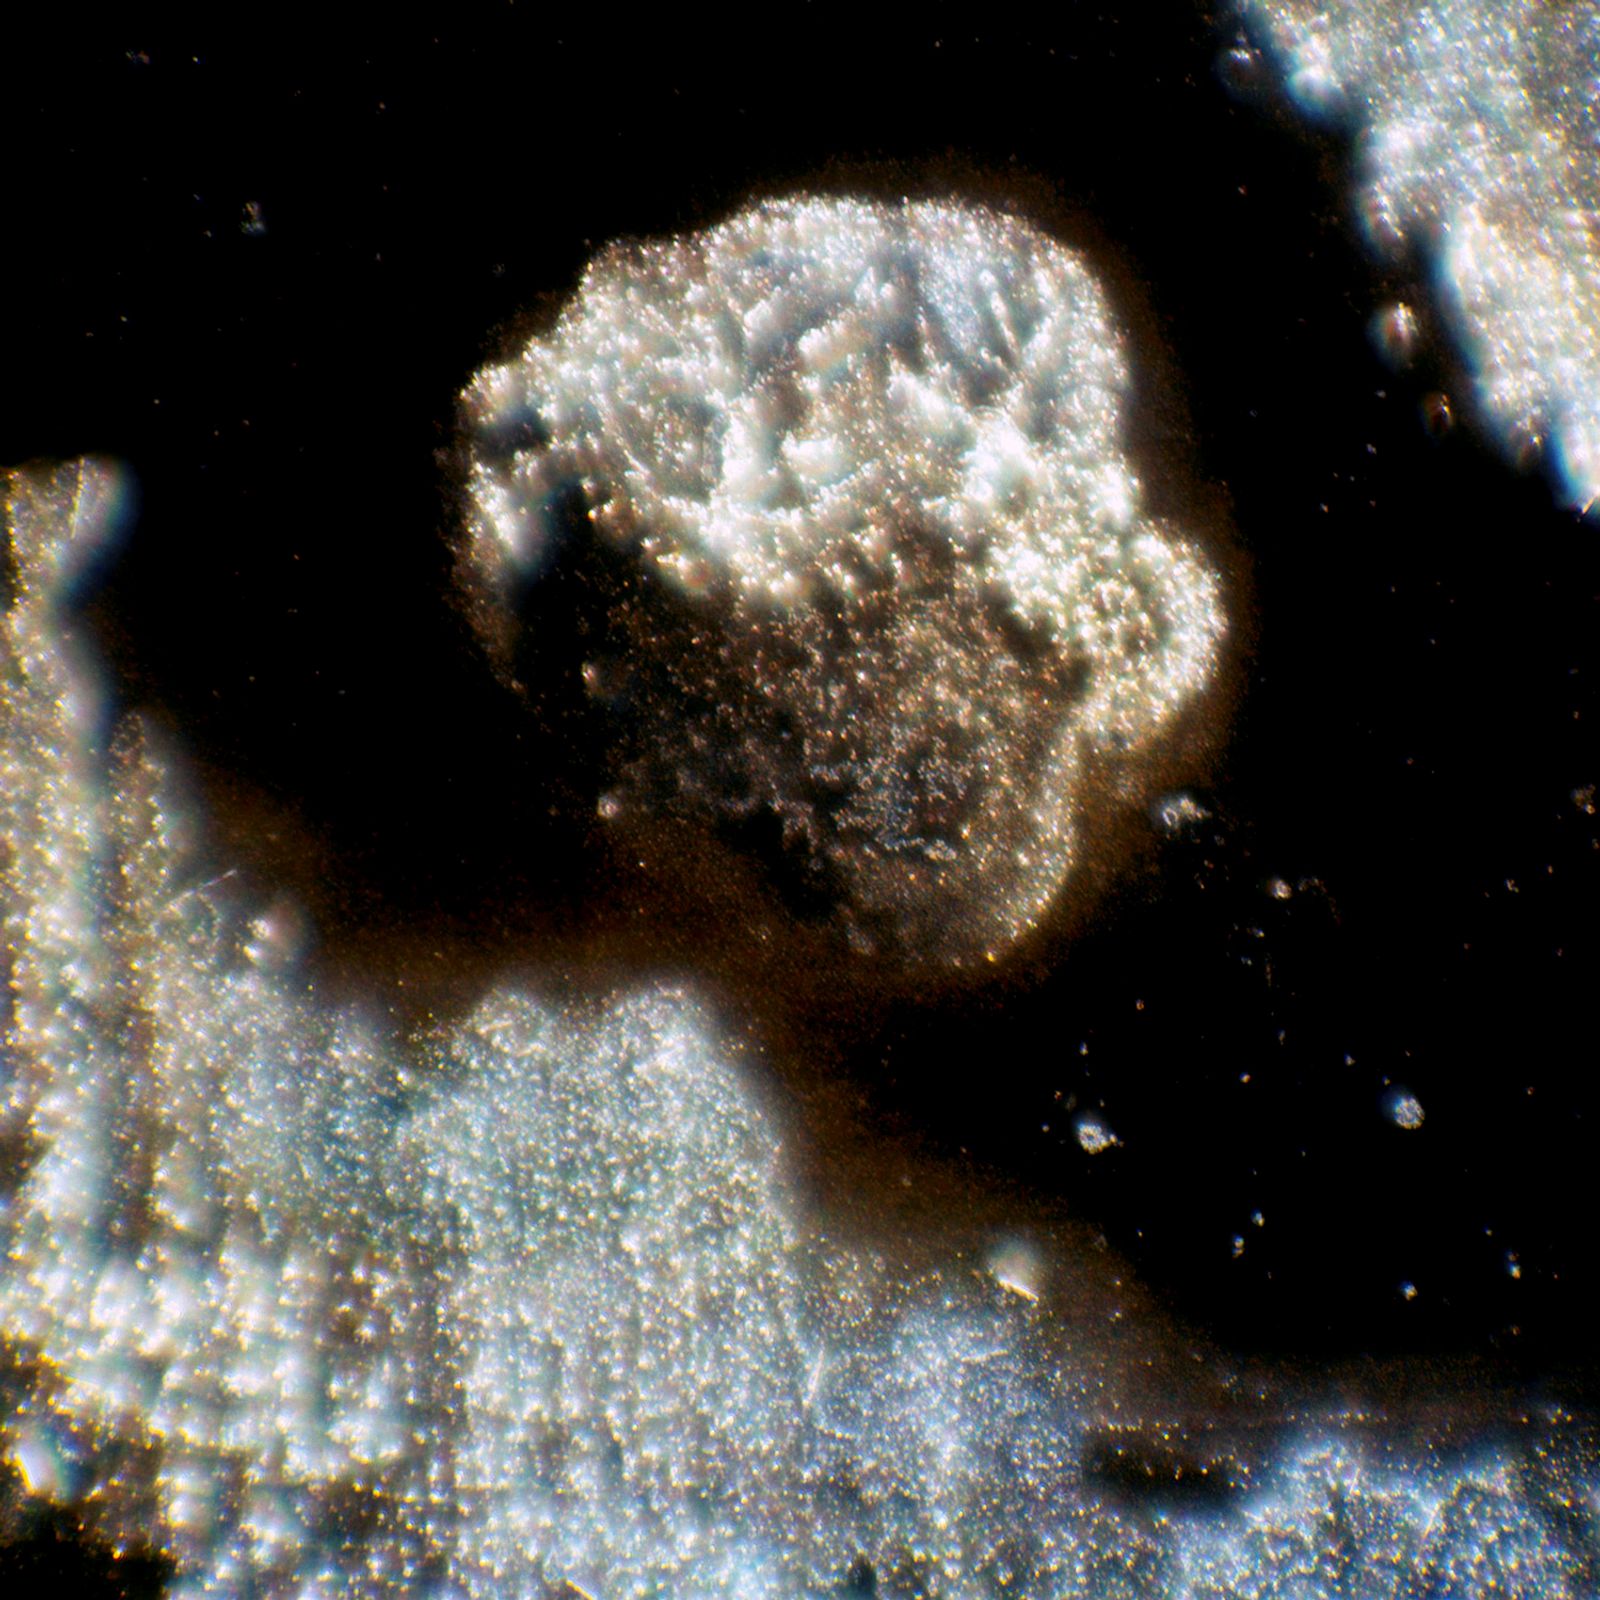 © ROGER GRASAS - Interferential contrast photomicrograph of my thumbprint at 6000x magnification